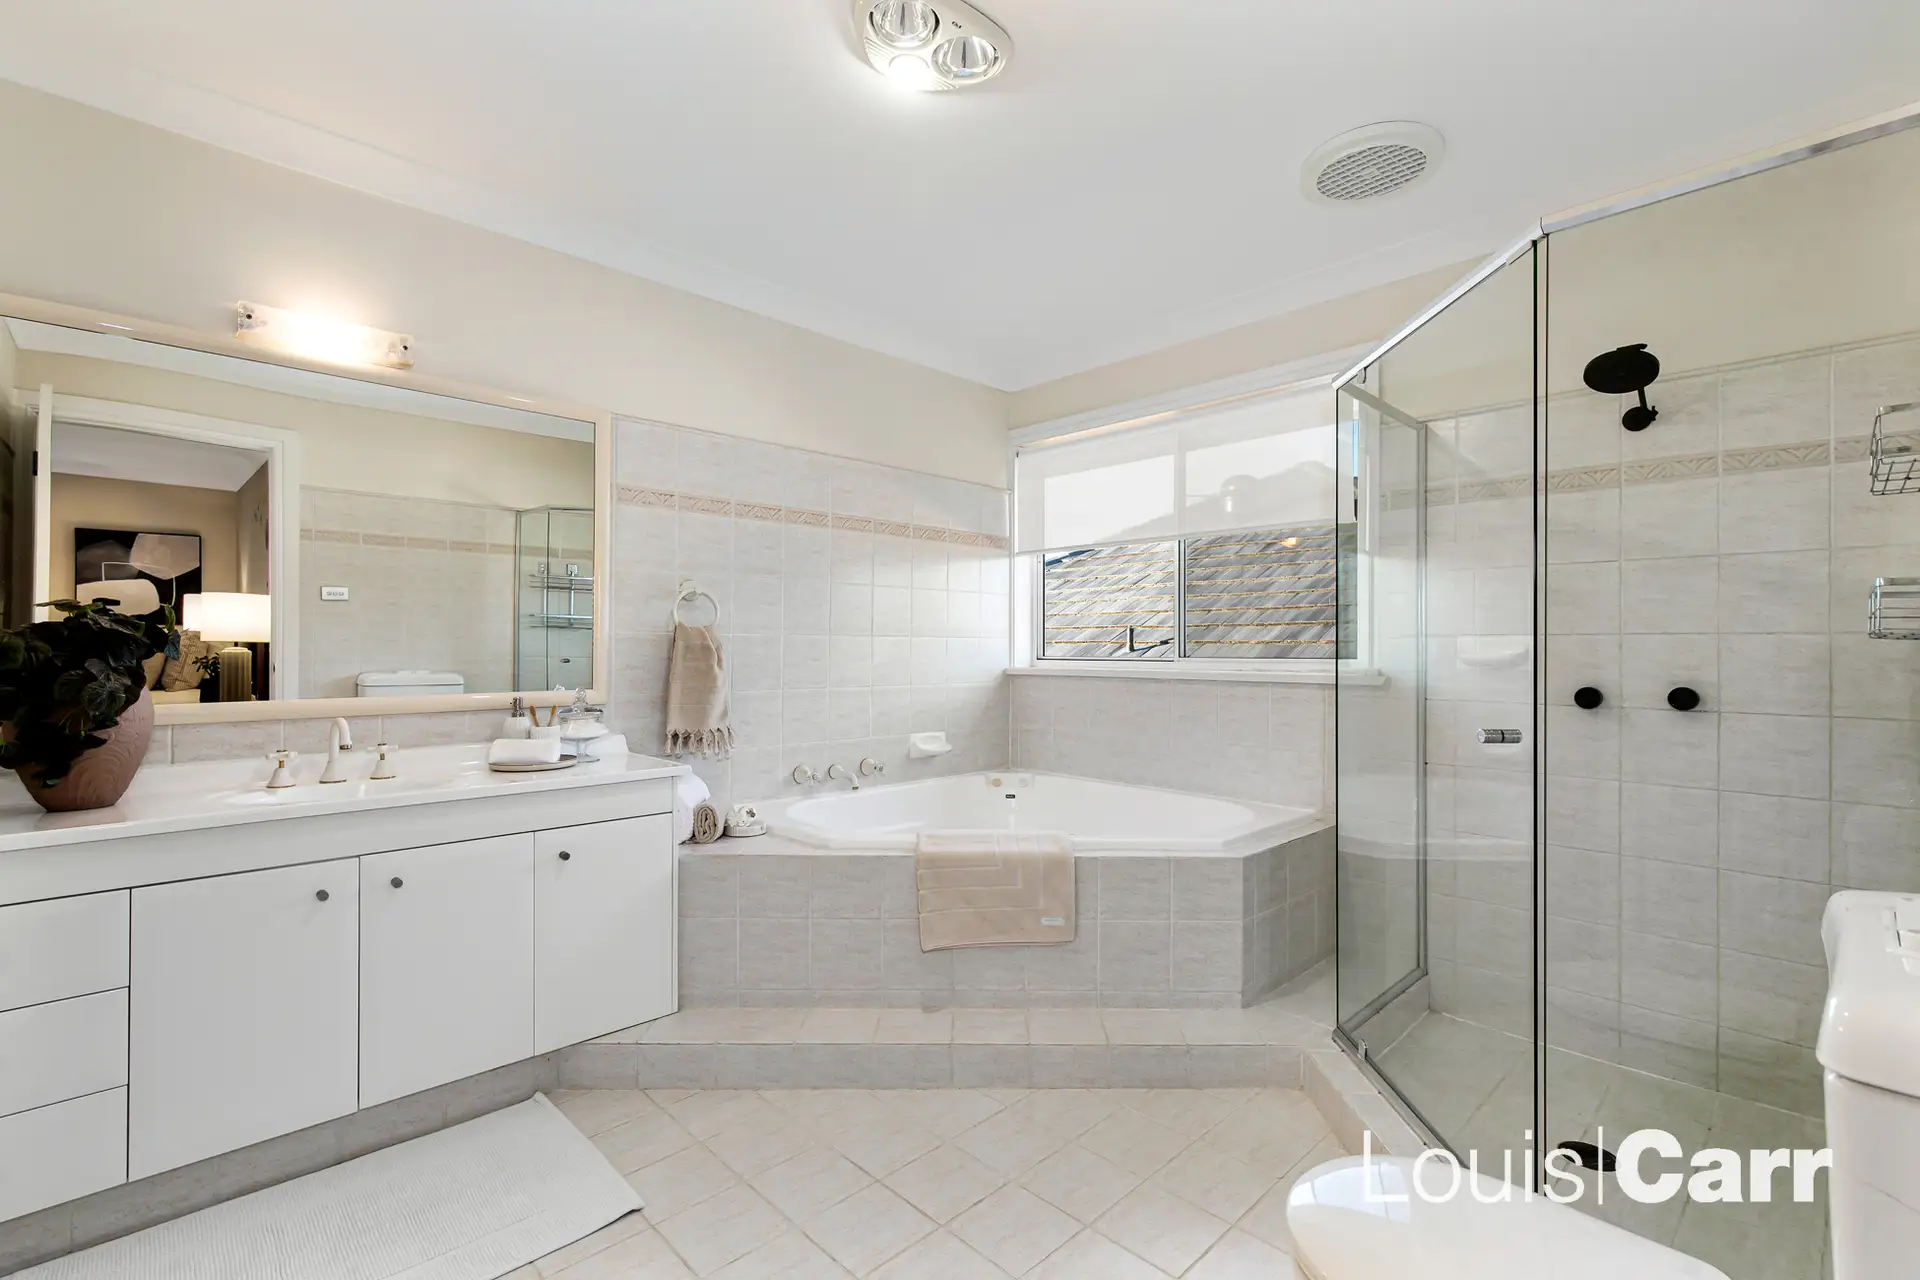 Photo #9: 12 Kambah Place, West Pennant Hills - Sold by Louis Carr Real Estate